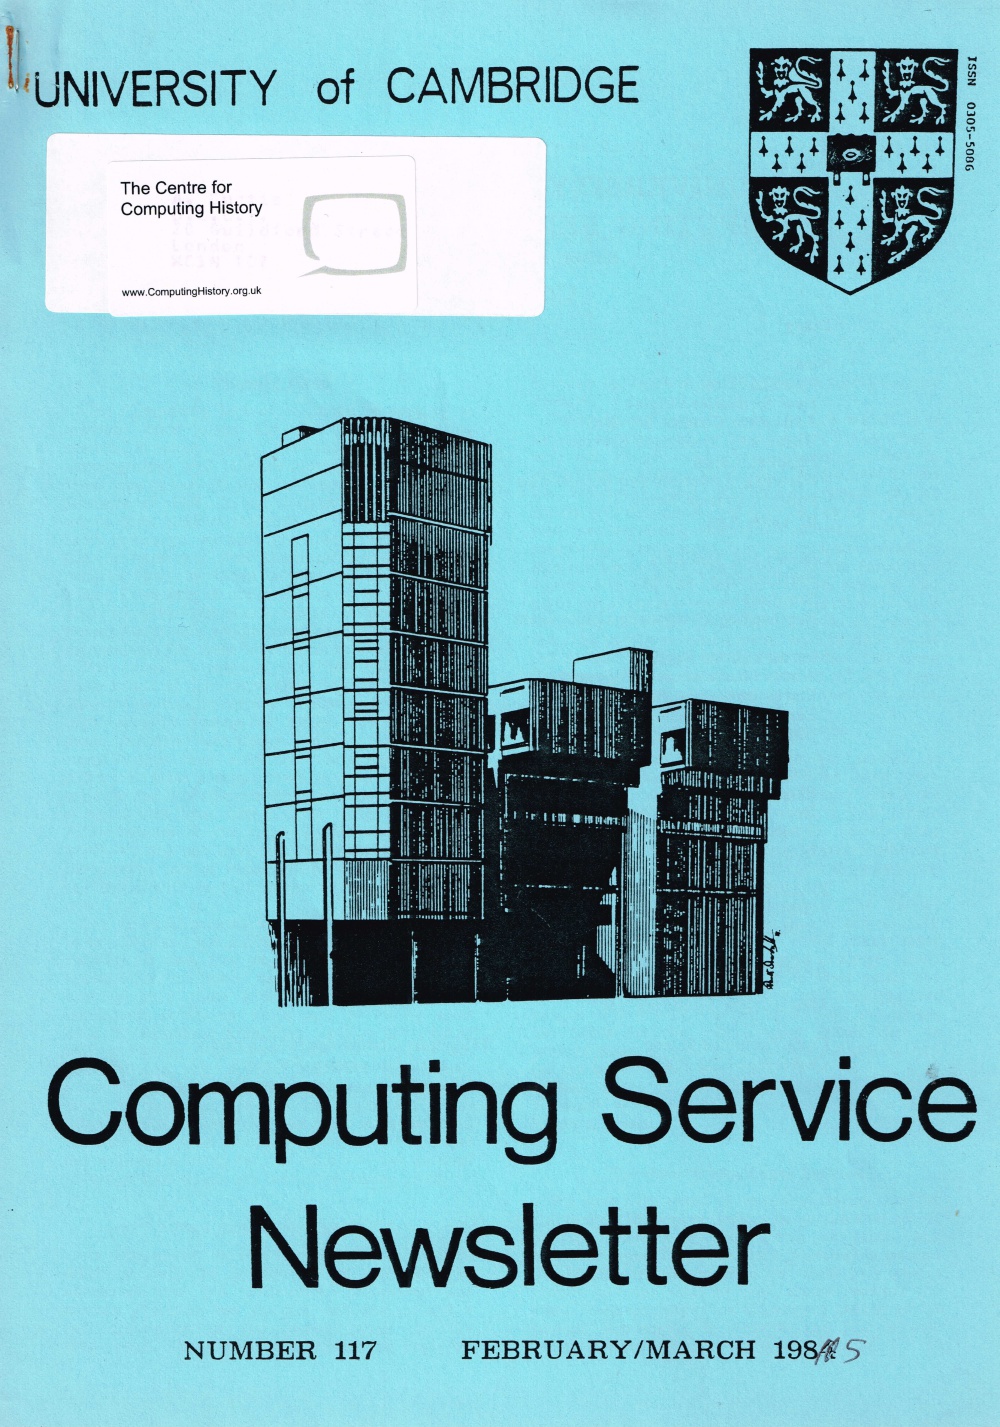 Article: University of Cambridge Computing Service February/March 1985 Newsletter 117